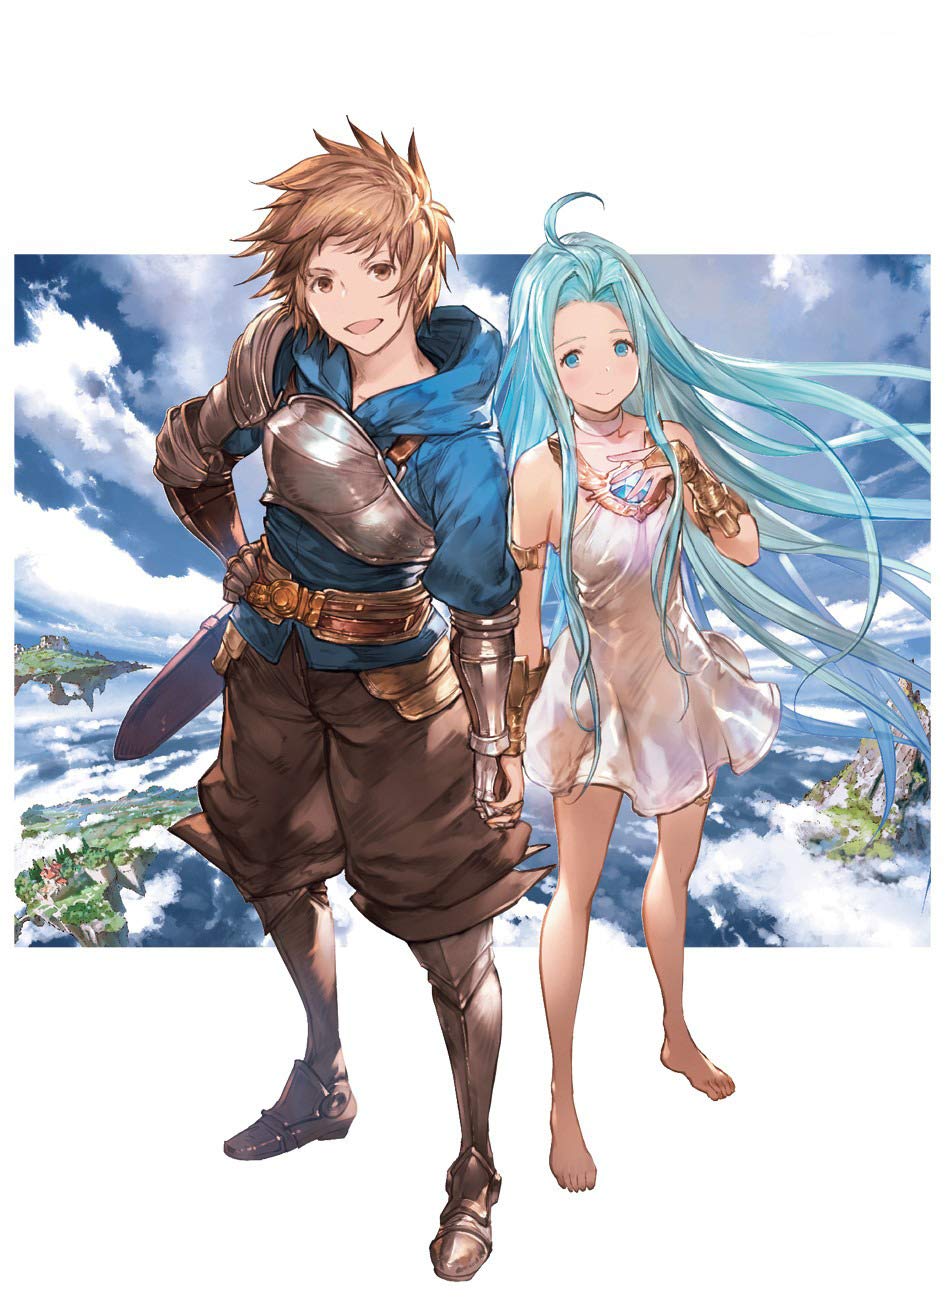 Granblue Fantasy The Animation Vol.7 [Limited Edition]